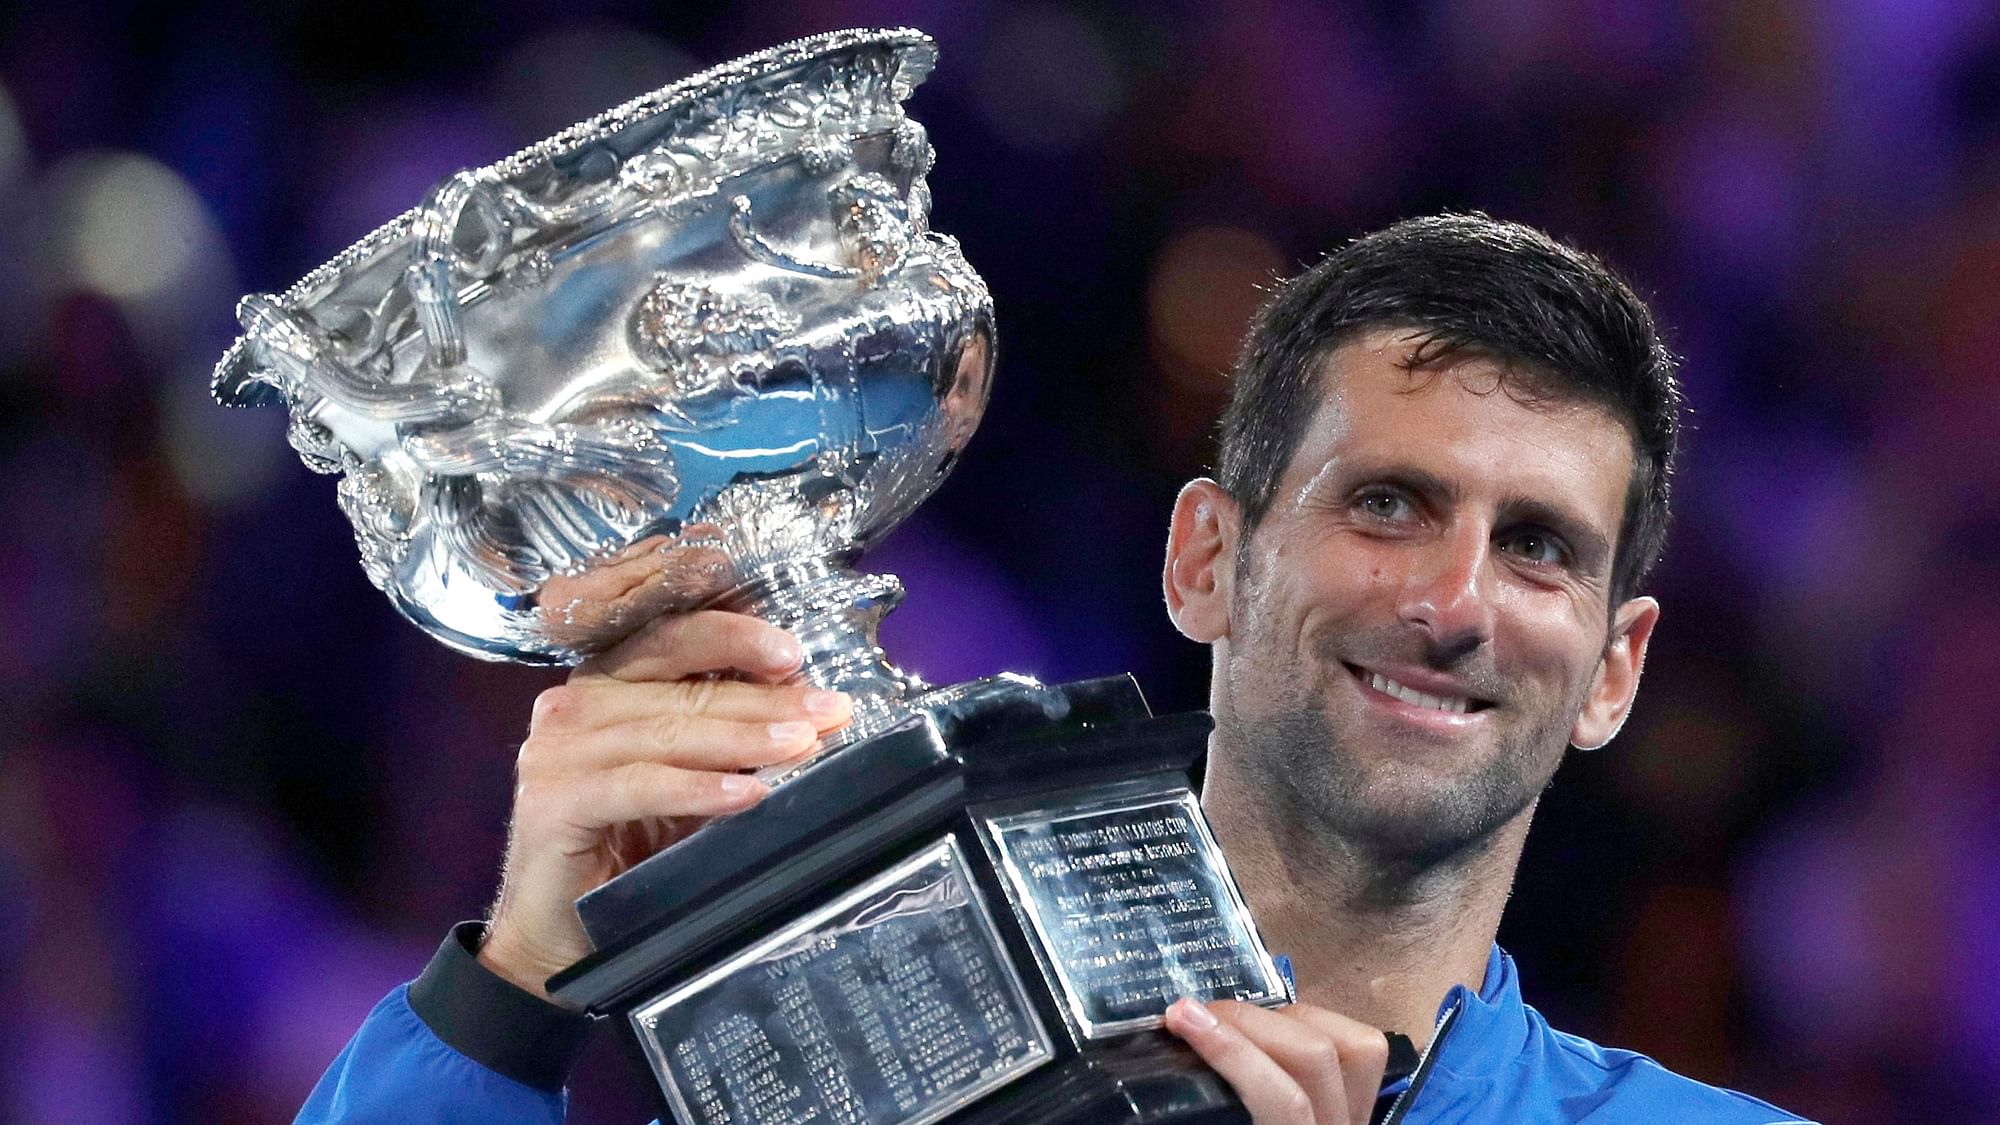 With this win, Djokovic goes ahead of Roger Federer and Roy Emerson, who both won six Australian Open men’s singles titles.